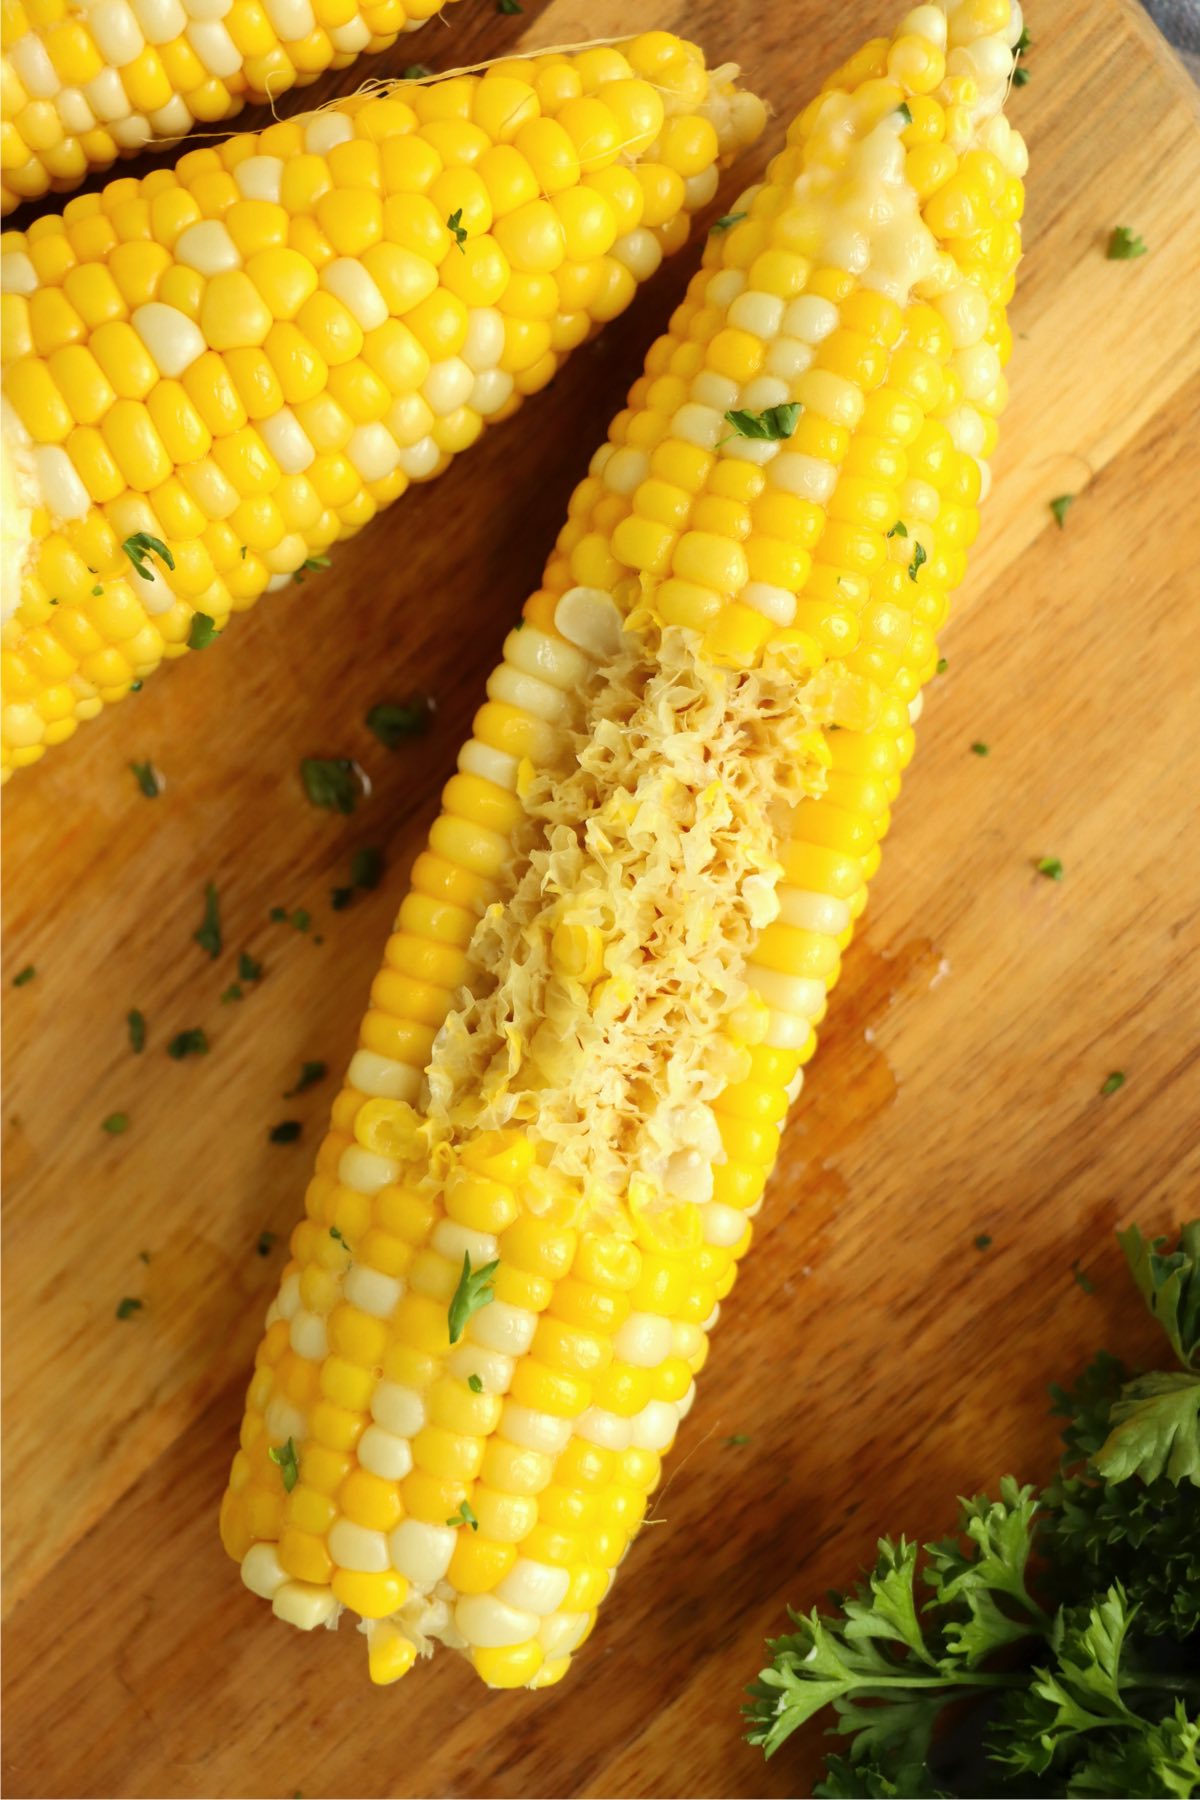 corn on the cob with some rows eaten out